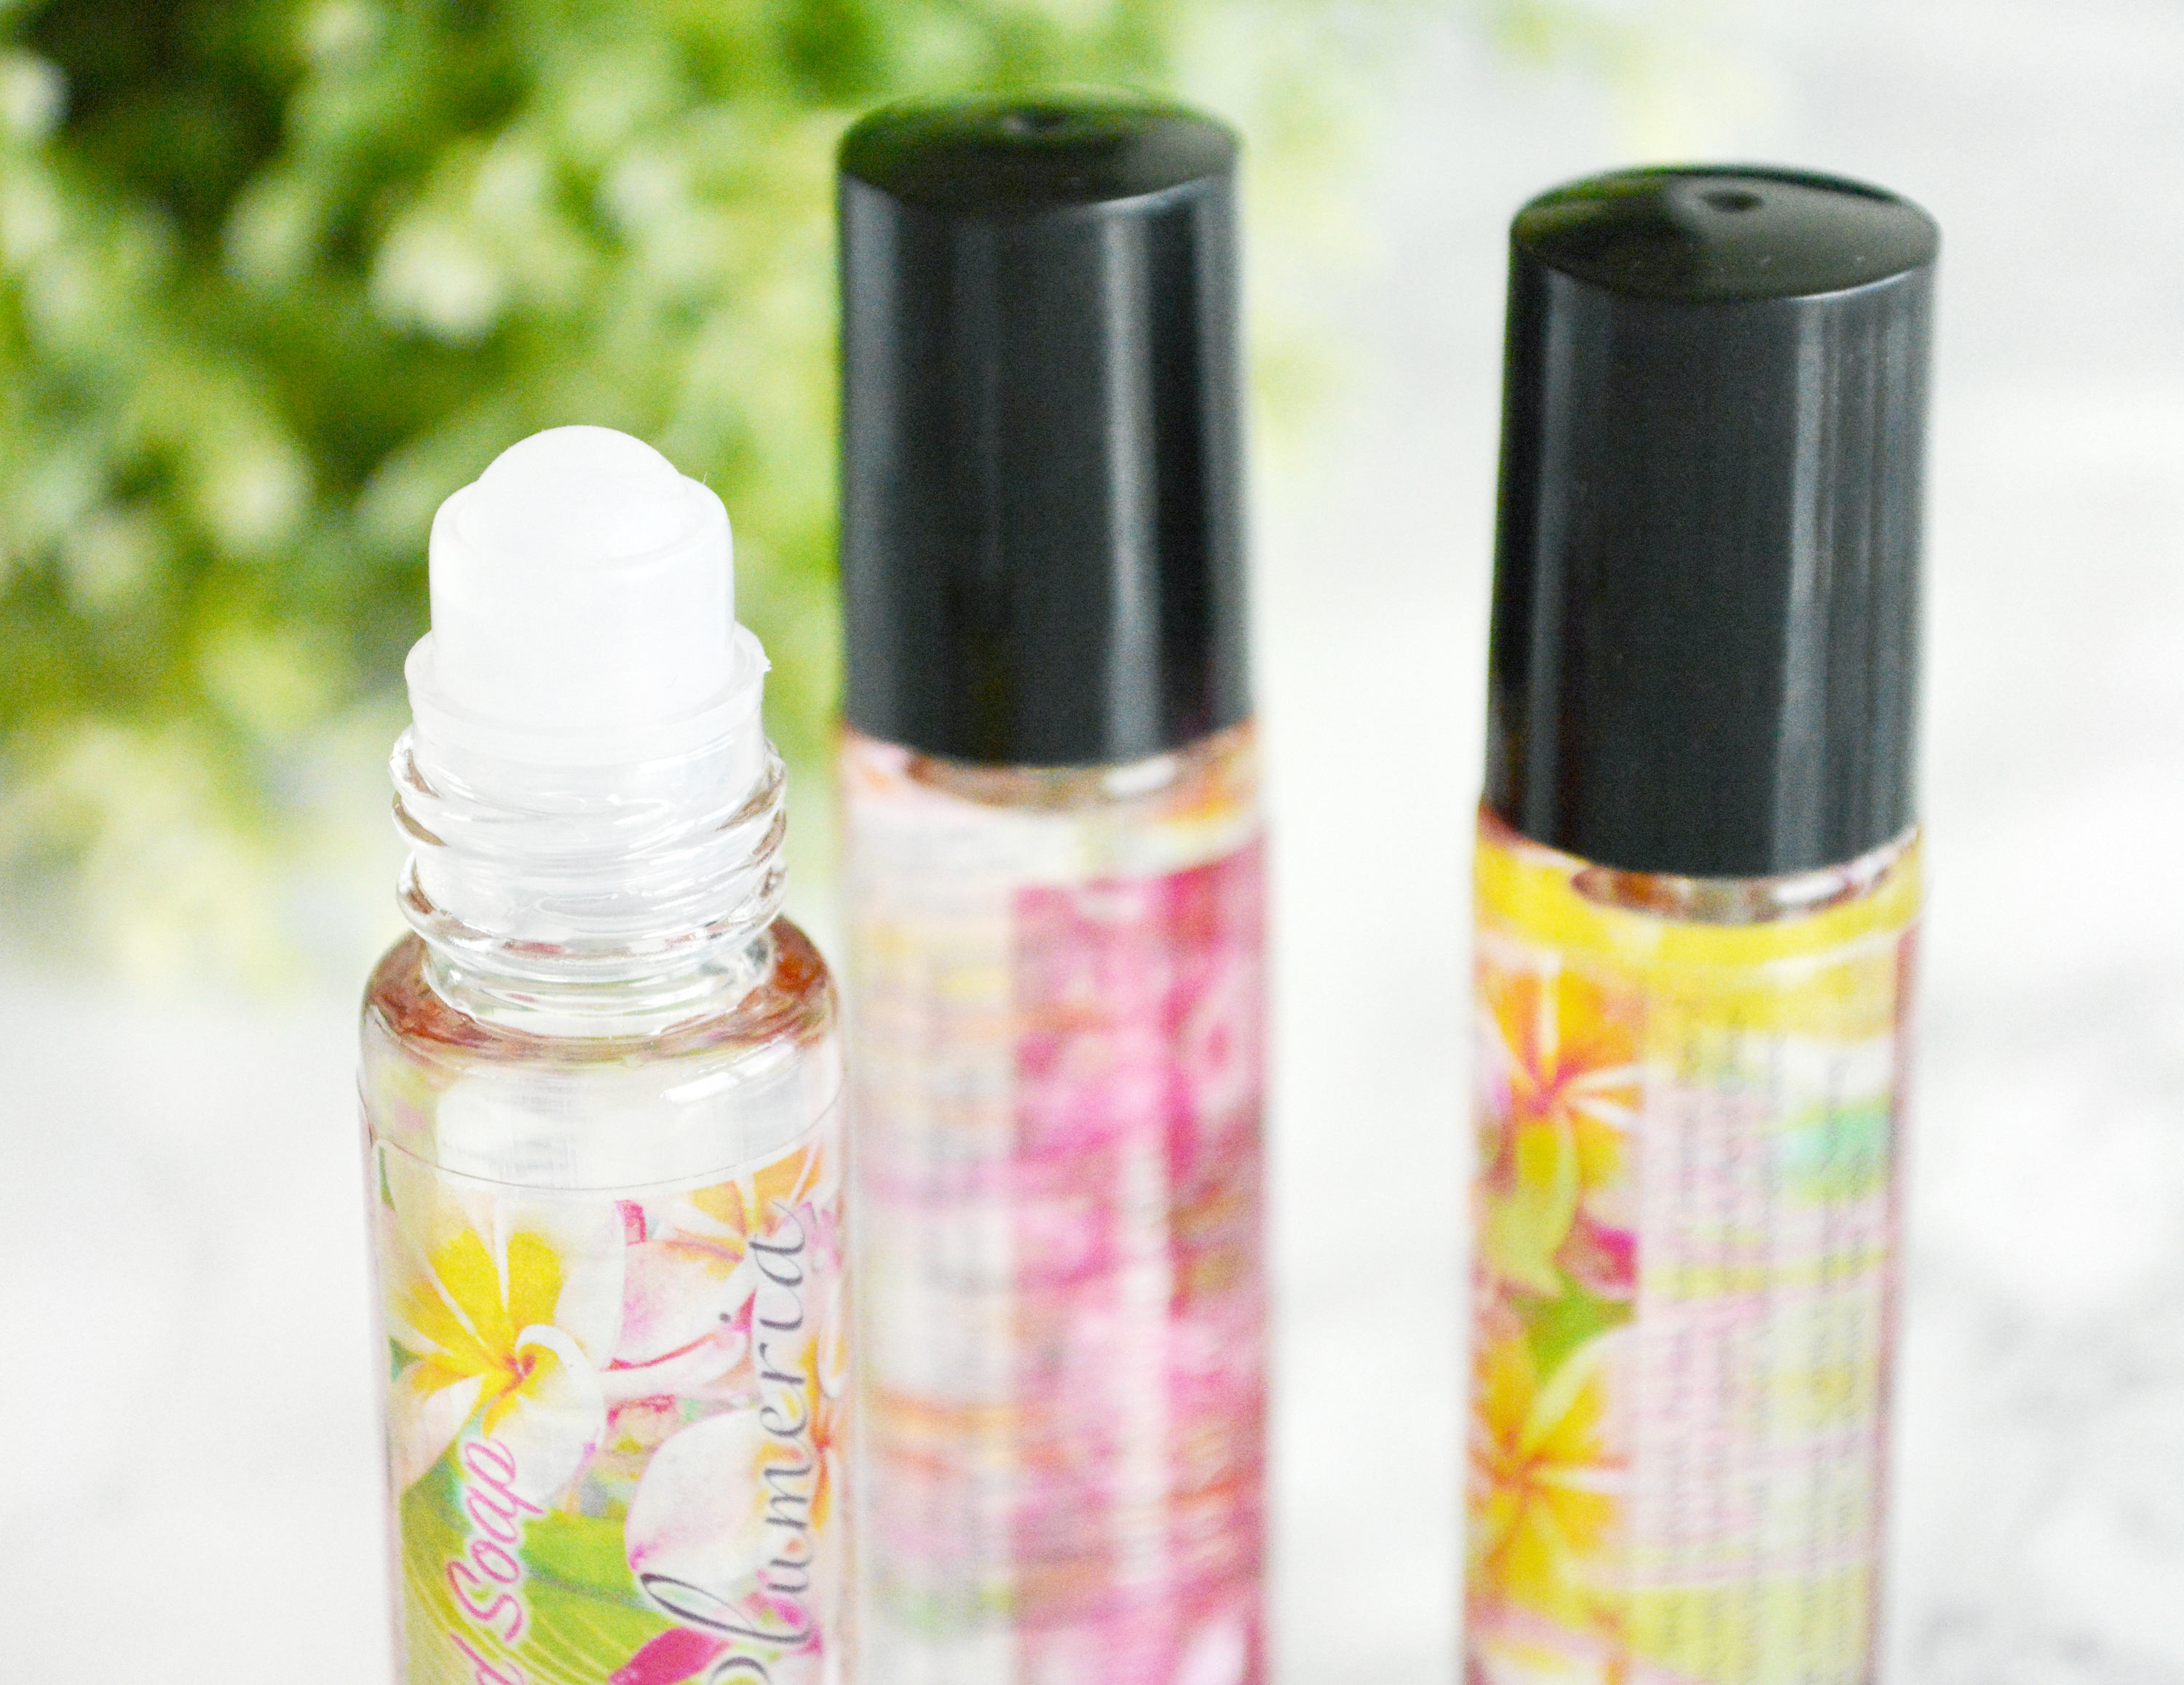 Berry Plumeria Perfume Oil by Tailored Soap